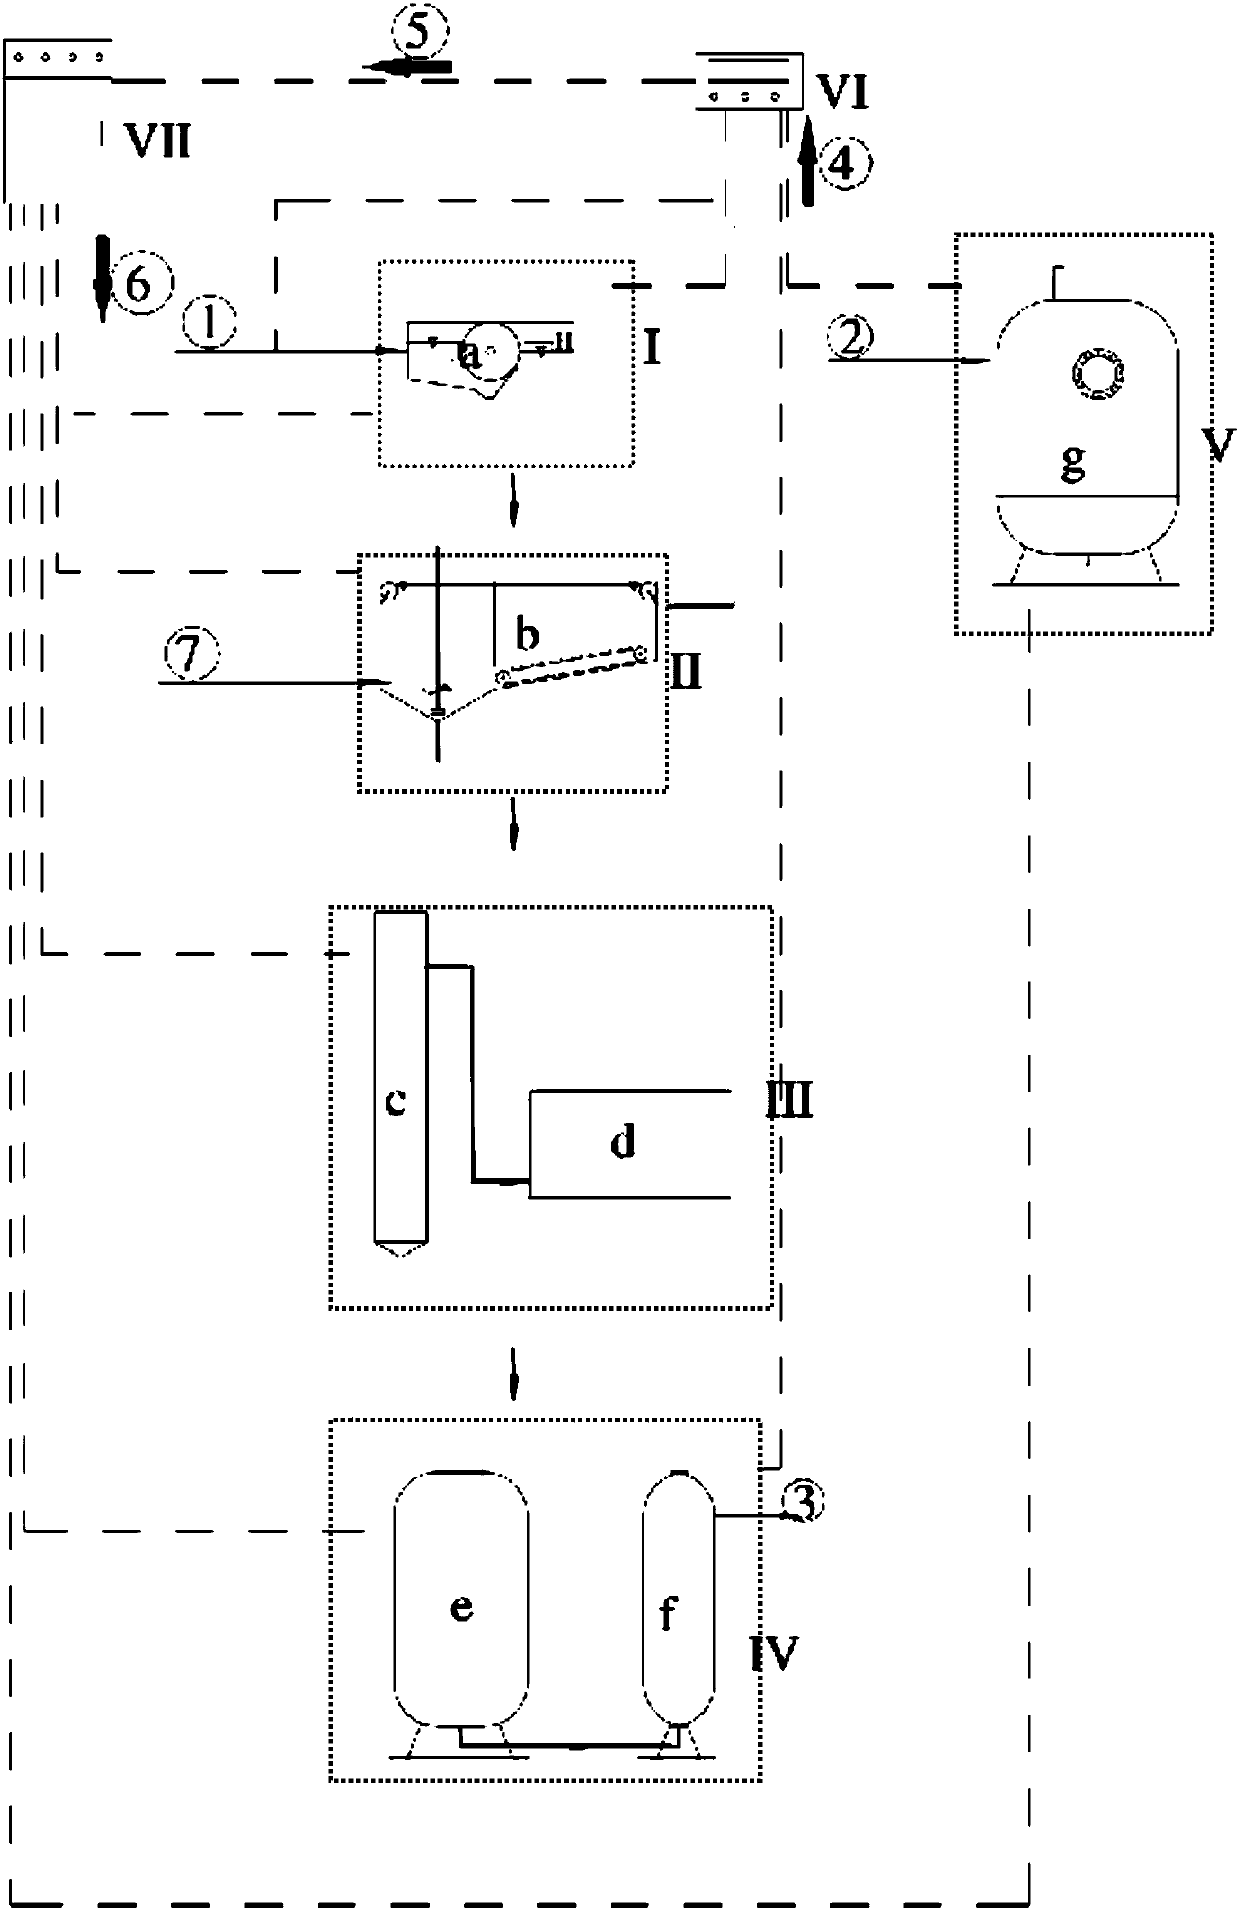 A Modular Integrated Process Method Suitable for Treating Slaughterhouse Wastewater